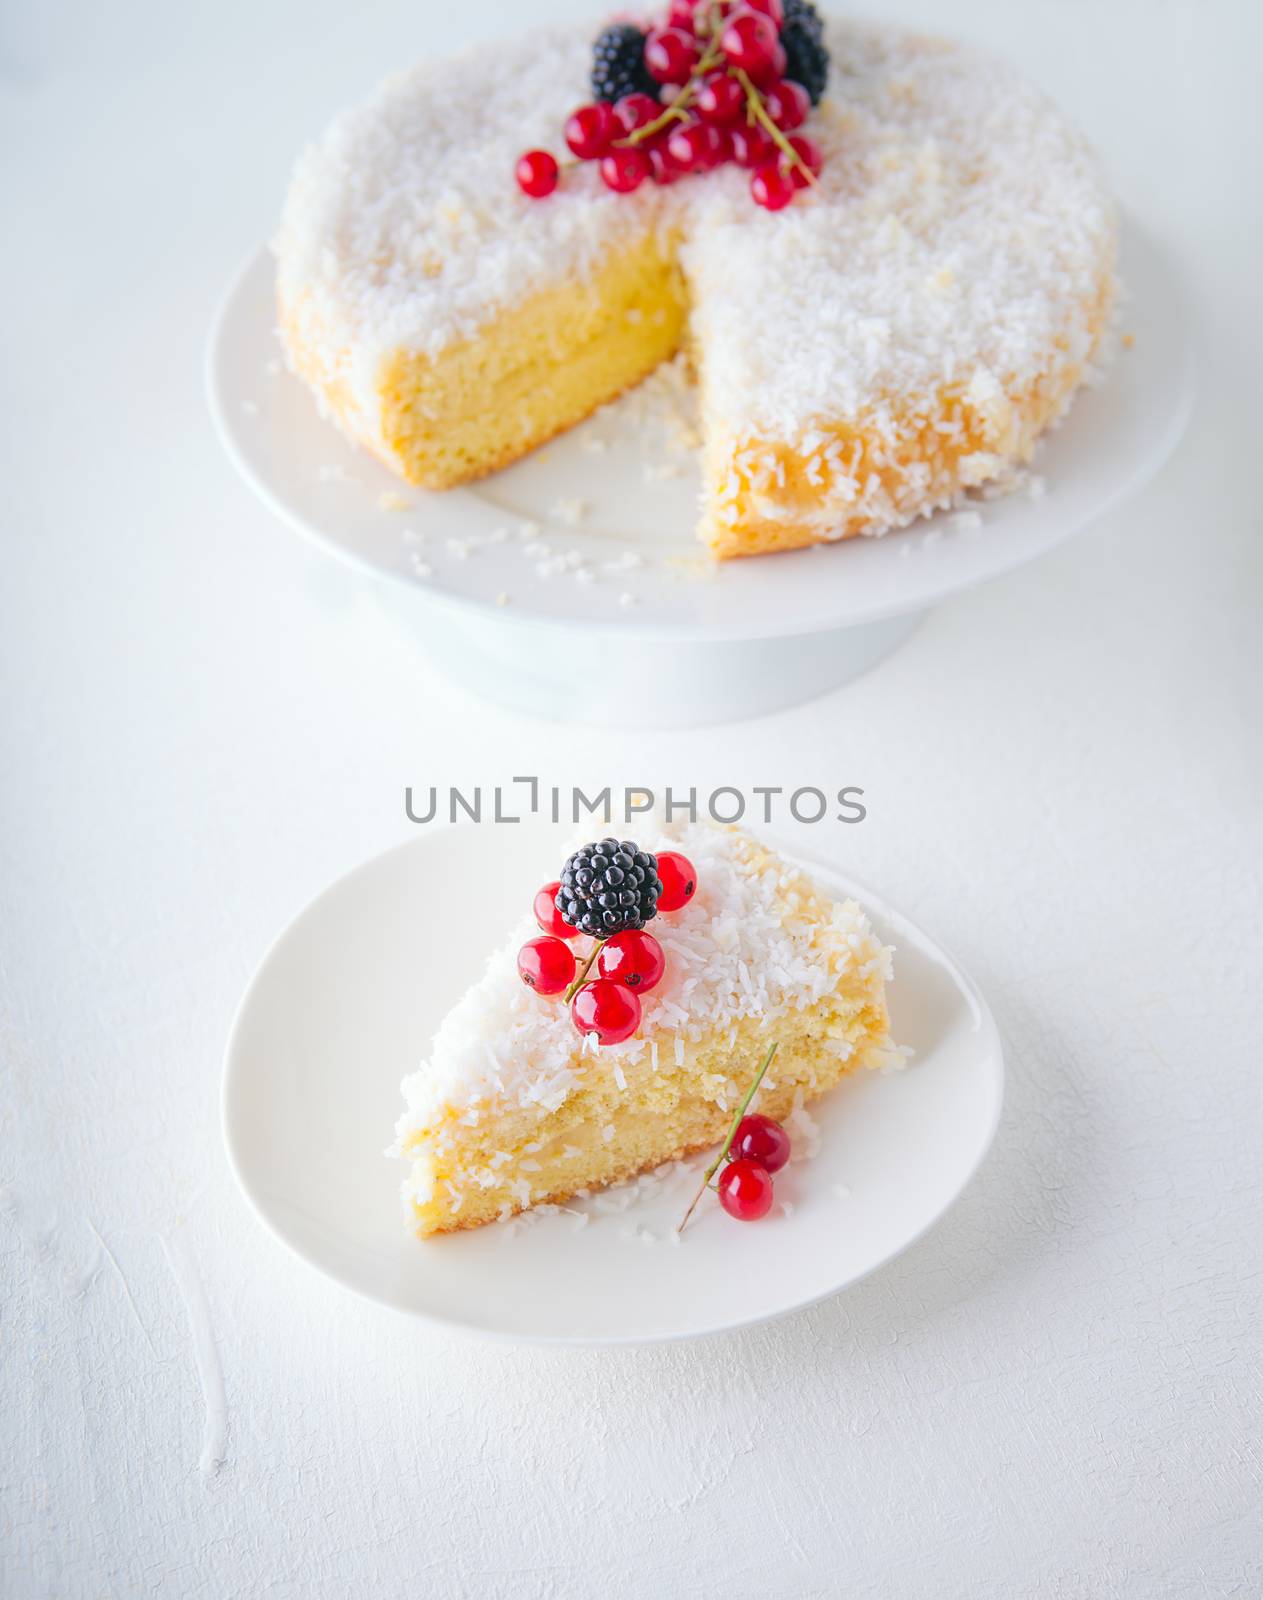 Homemade Coconut Cake by supercat67